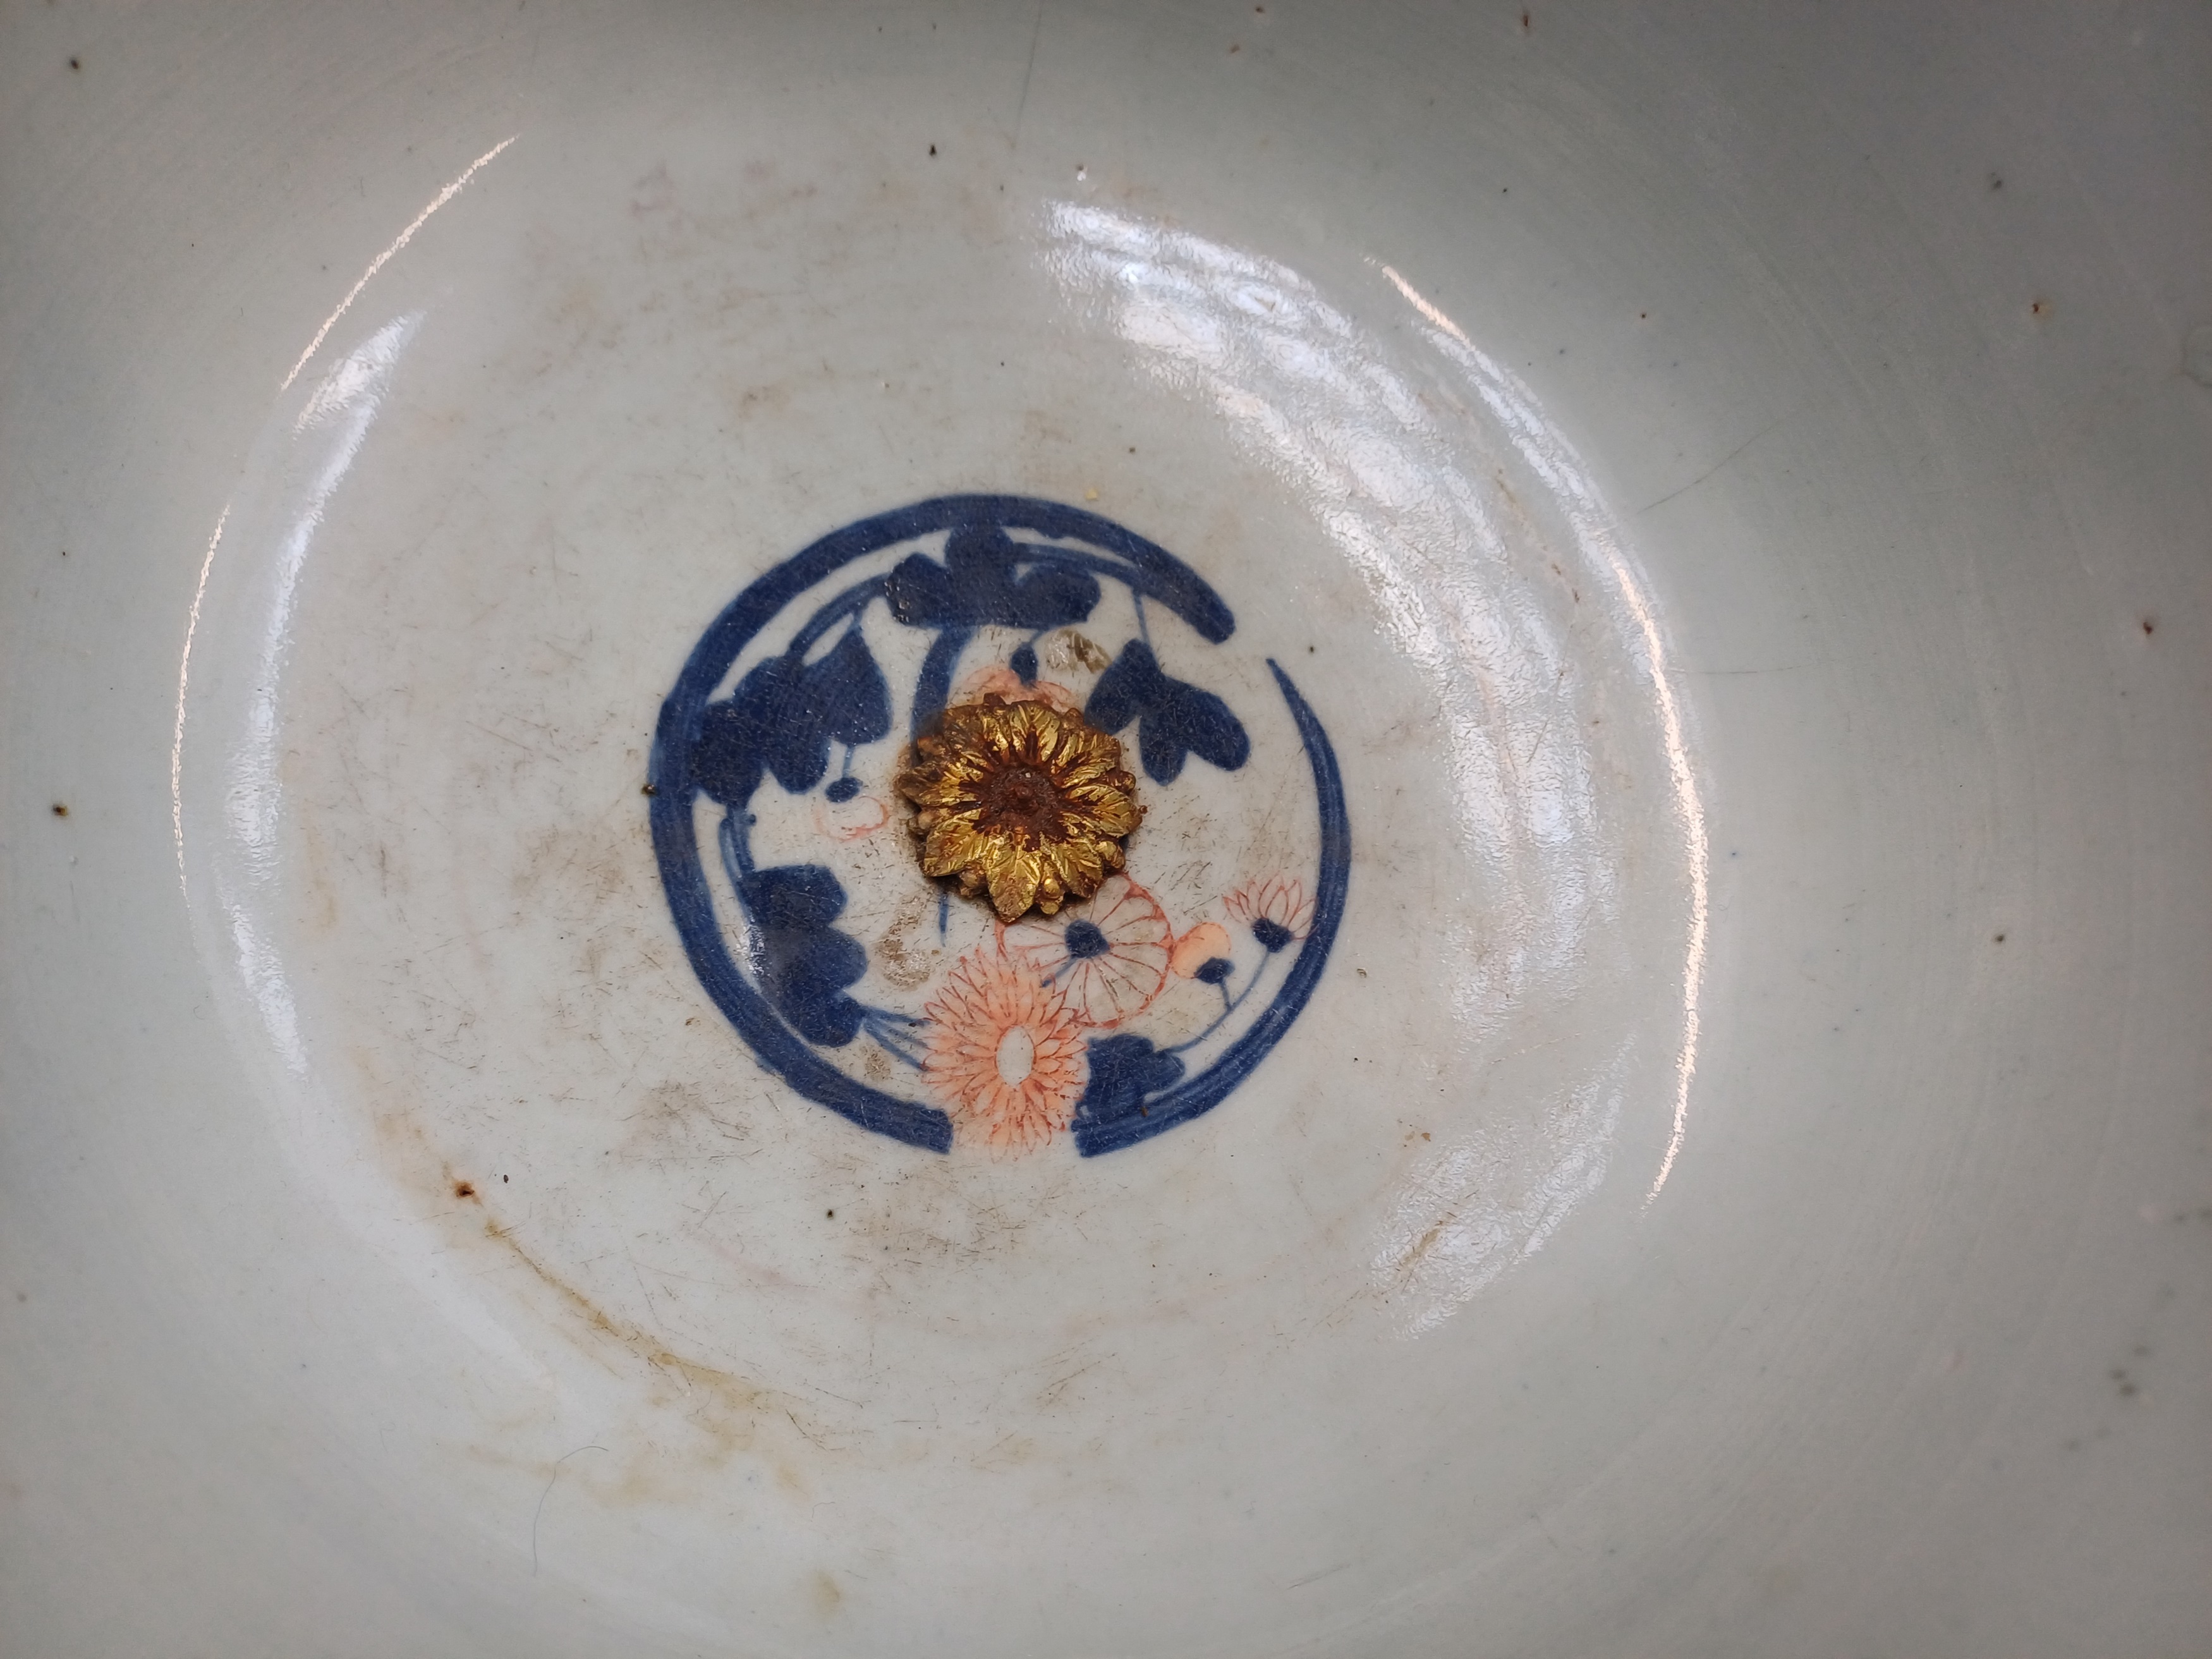 A JAPANESE IMARI POT, A FAMILLE-ROSE DISH, AND TWO JARDINIERES 十九至二十世紀 伊萬里罐，粉彩盤盆一對 - Image 13 of 17